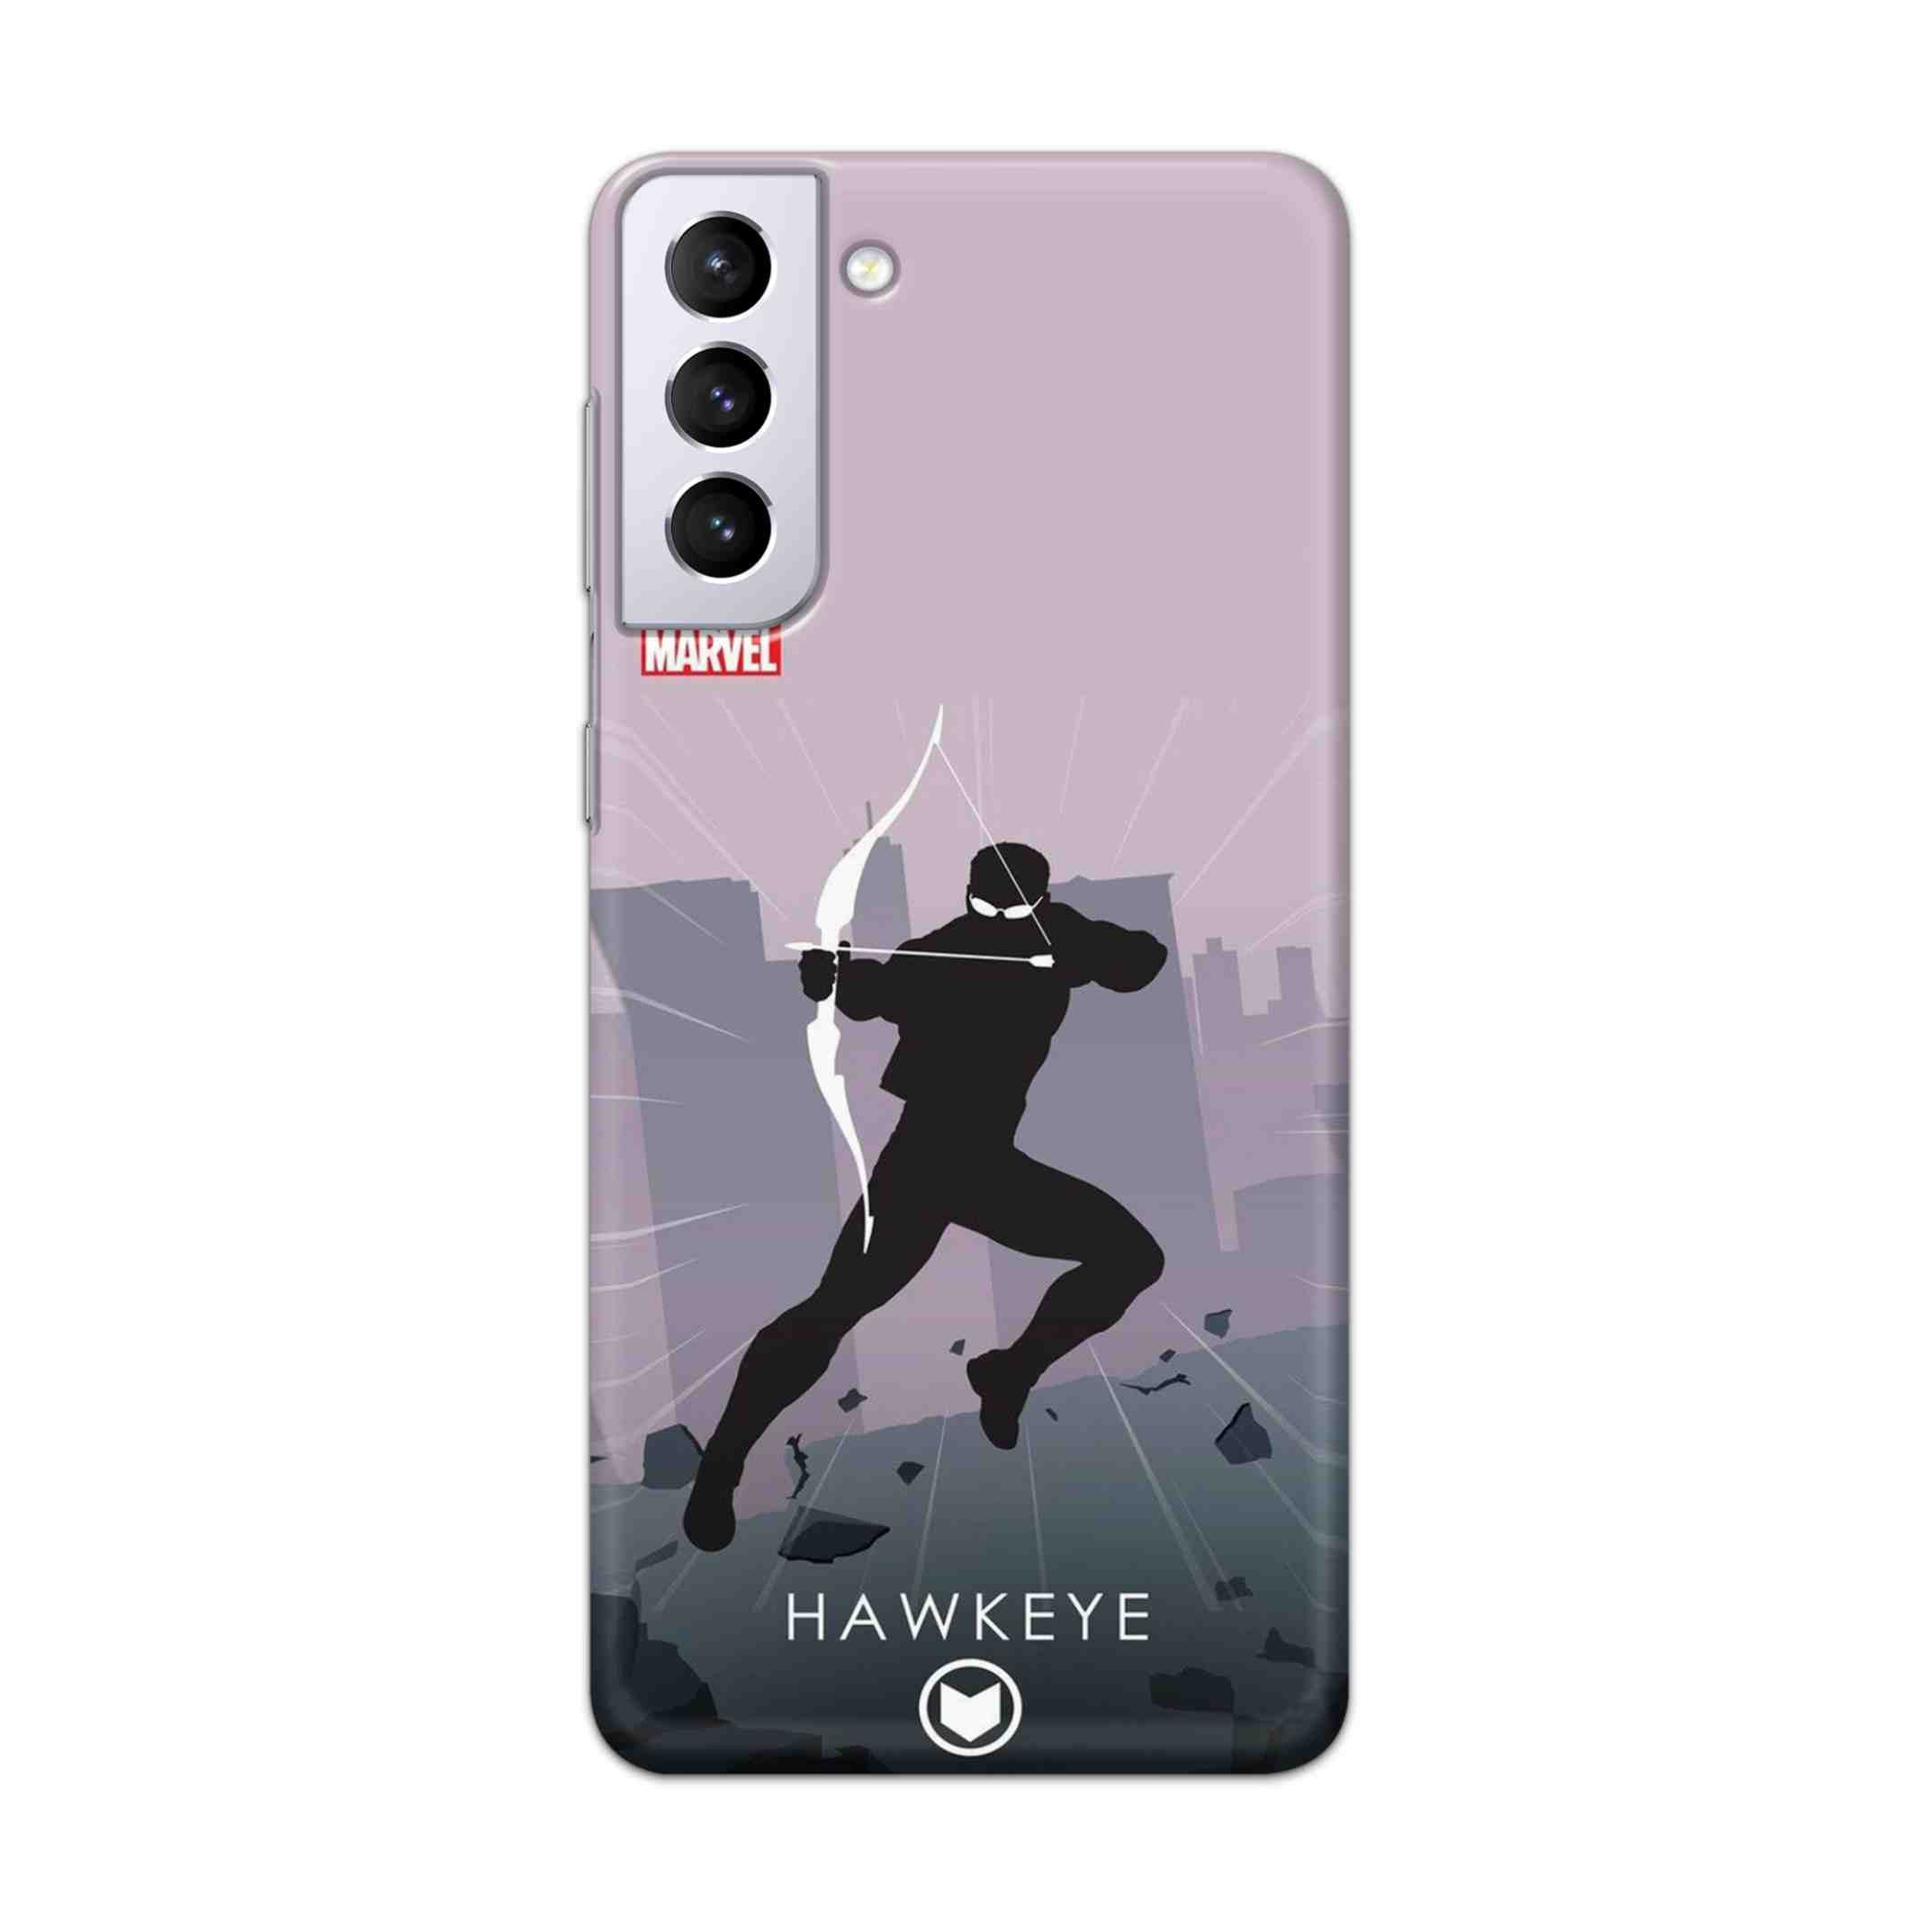 Buy Hawkeye Hard Back Mobile Phone Case Cover For Samsung Galaxy S21 Plus Online